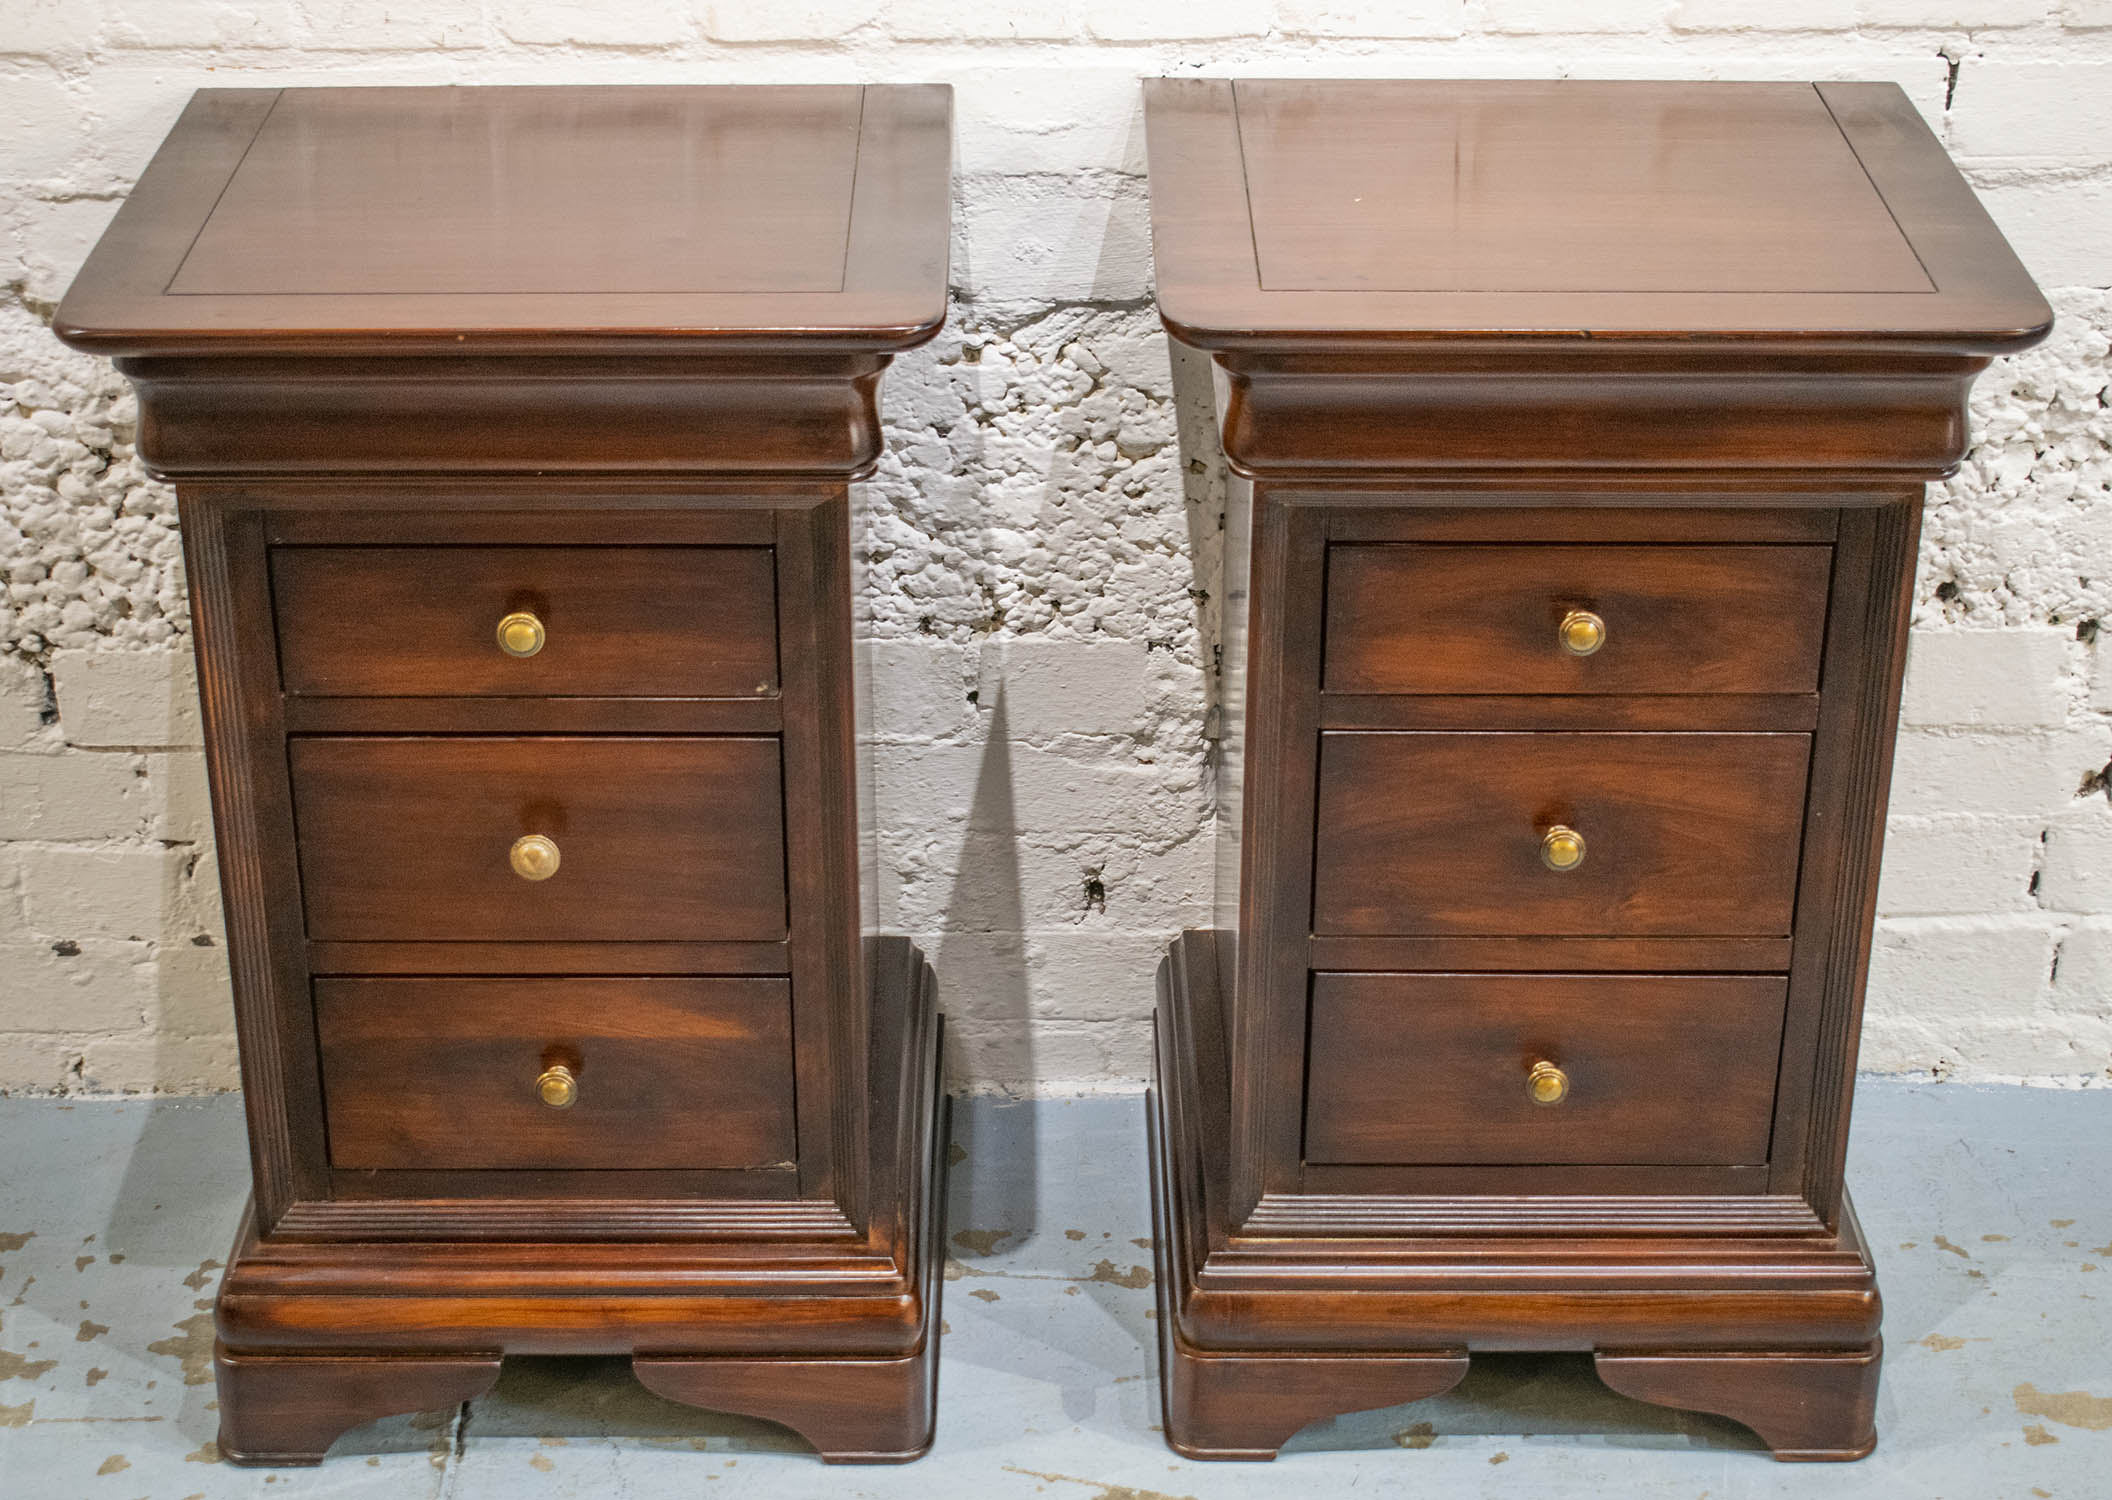 BEDSIDE CHESTS, a pair, Louis Philippe style with four drawers, 70cm H x 45cm W x 41cm D. (2)